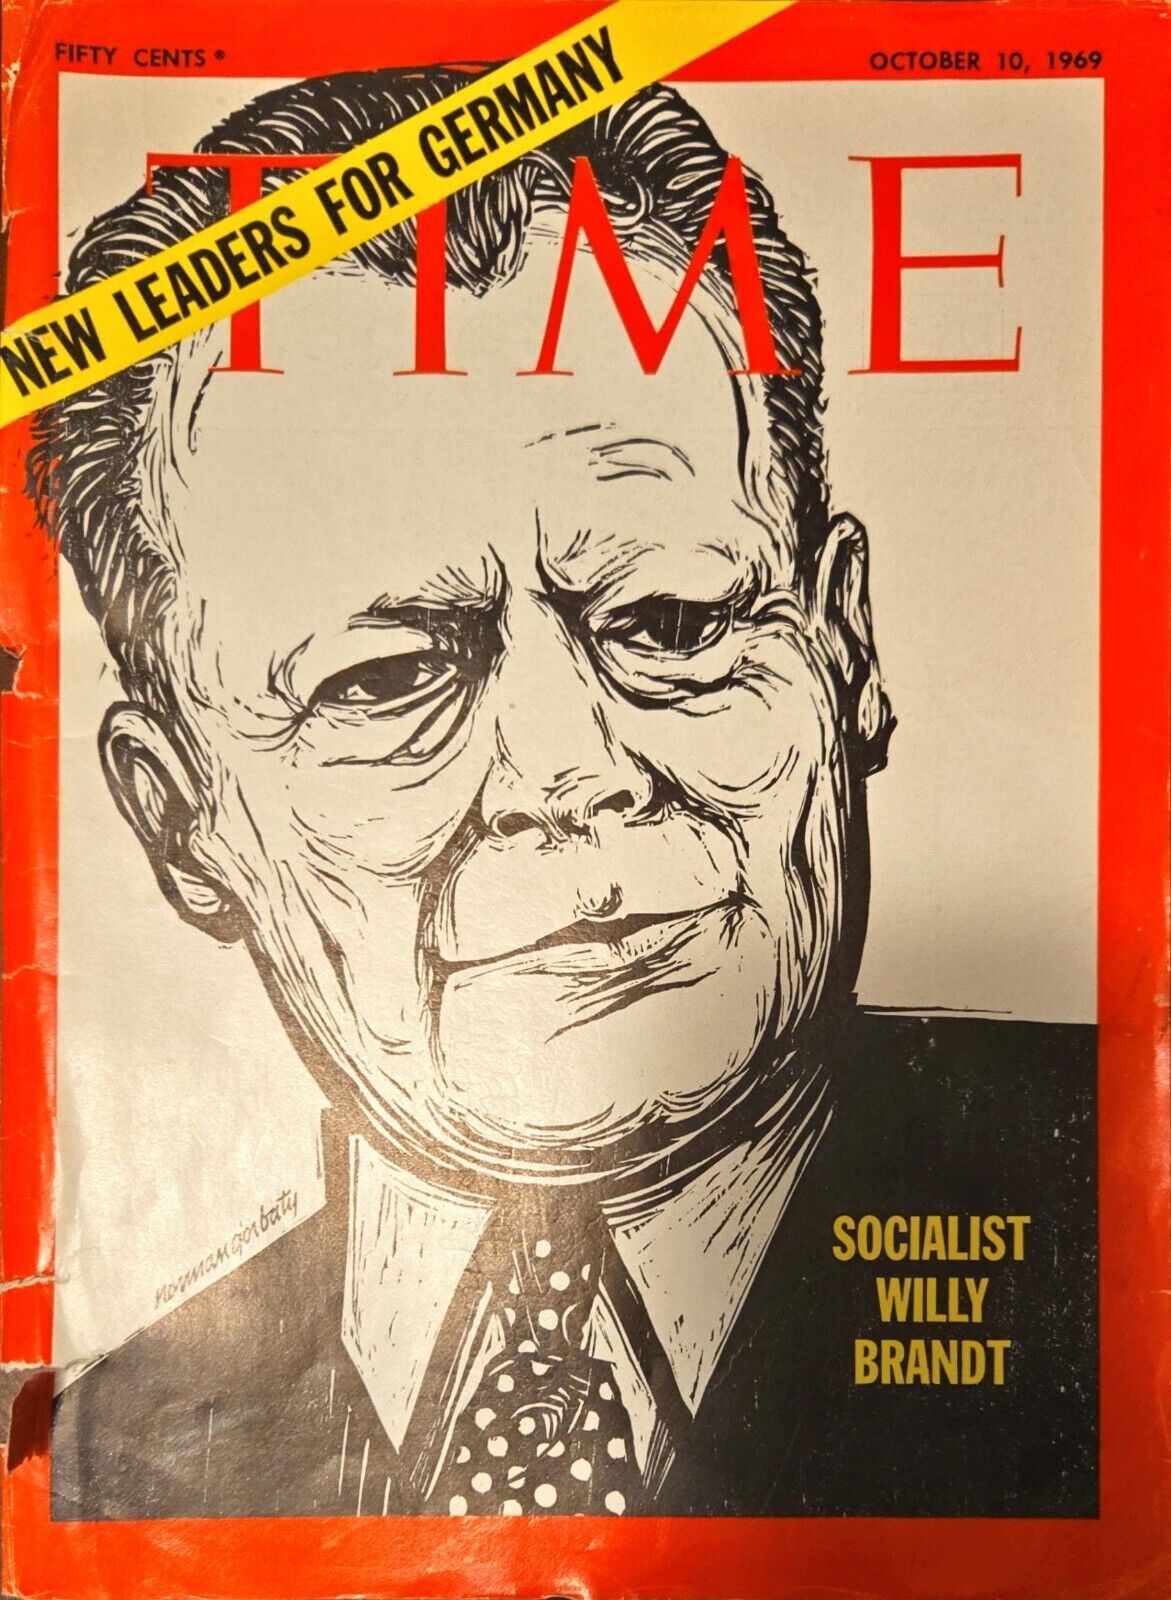 TIME Magazine COVER Page Vintage October 10, 1969 New Leaders For Germany 